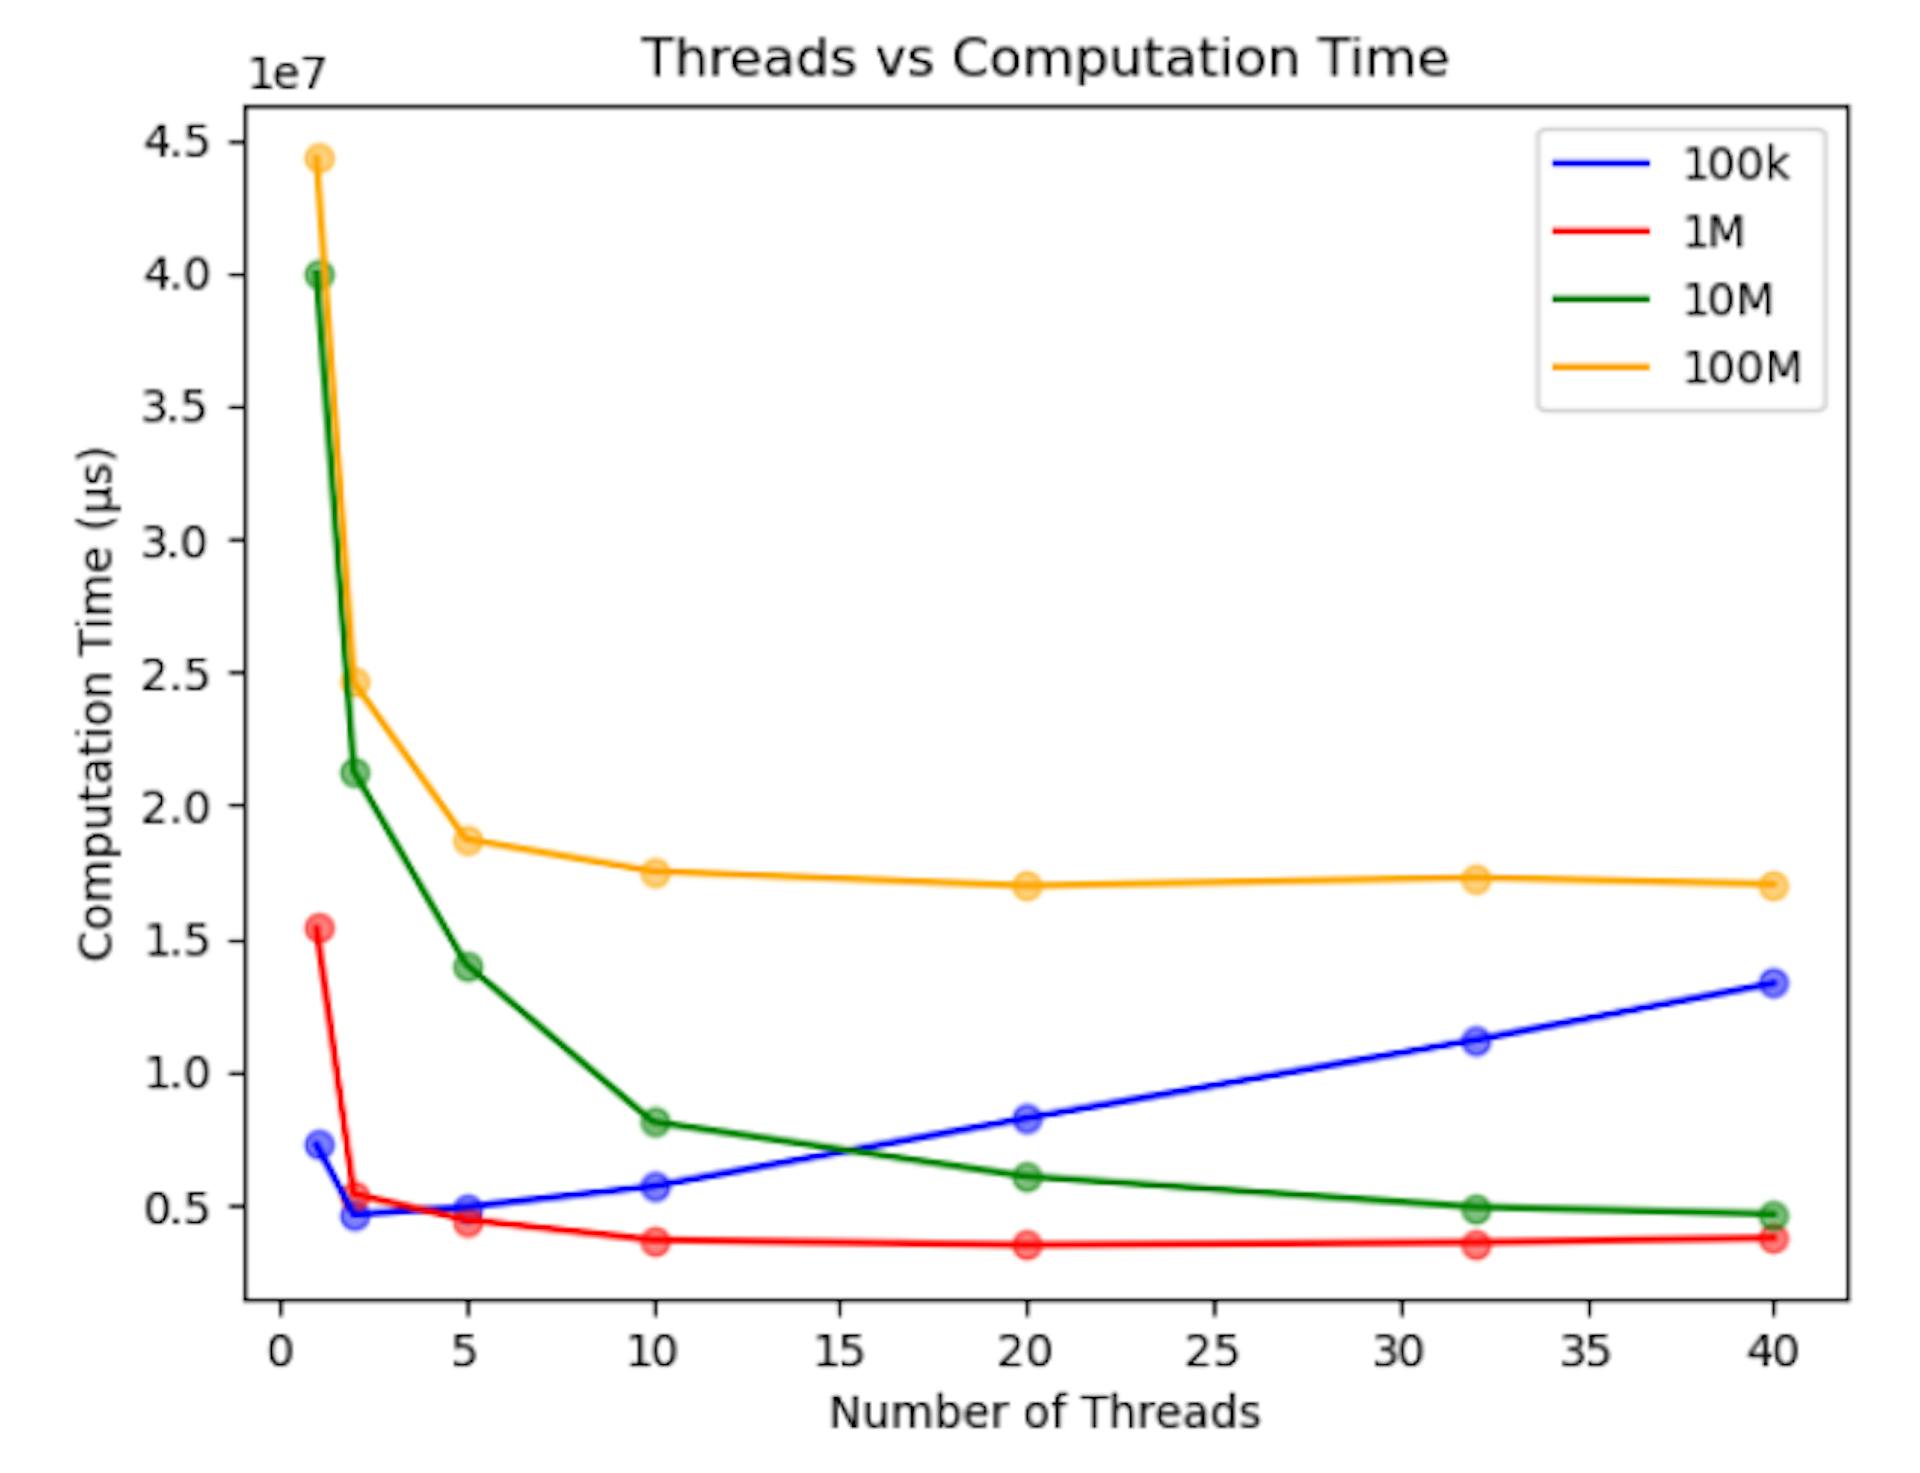 Figure 6. Computation Time for Various Array Sizes